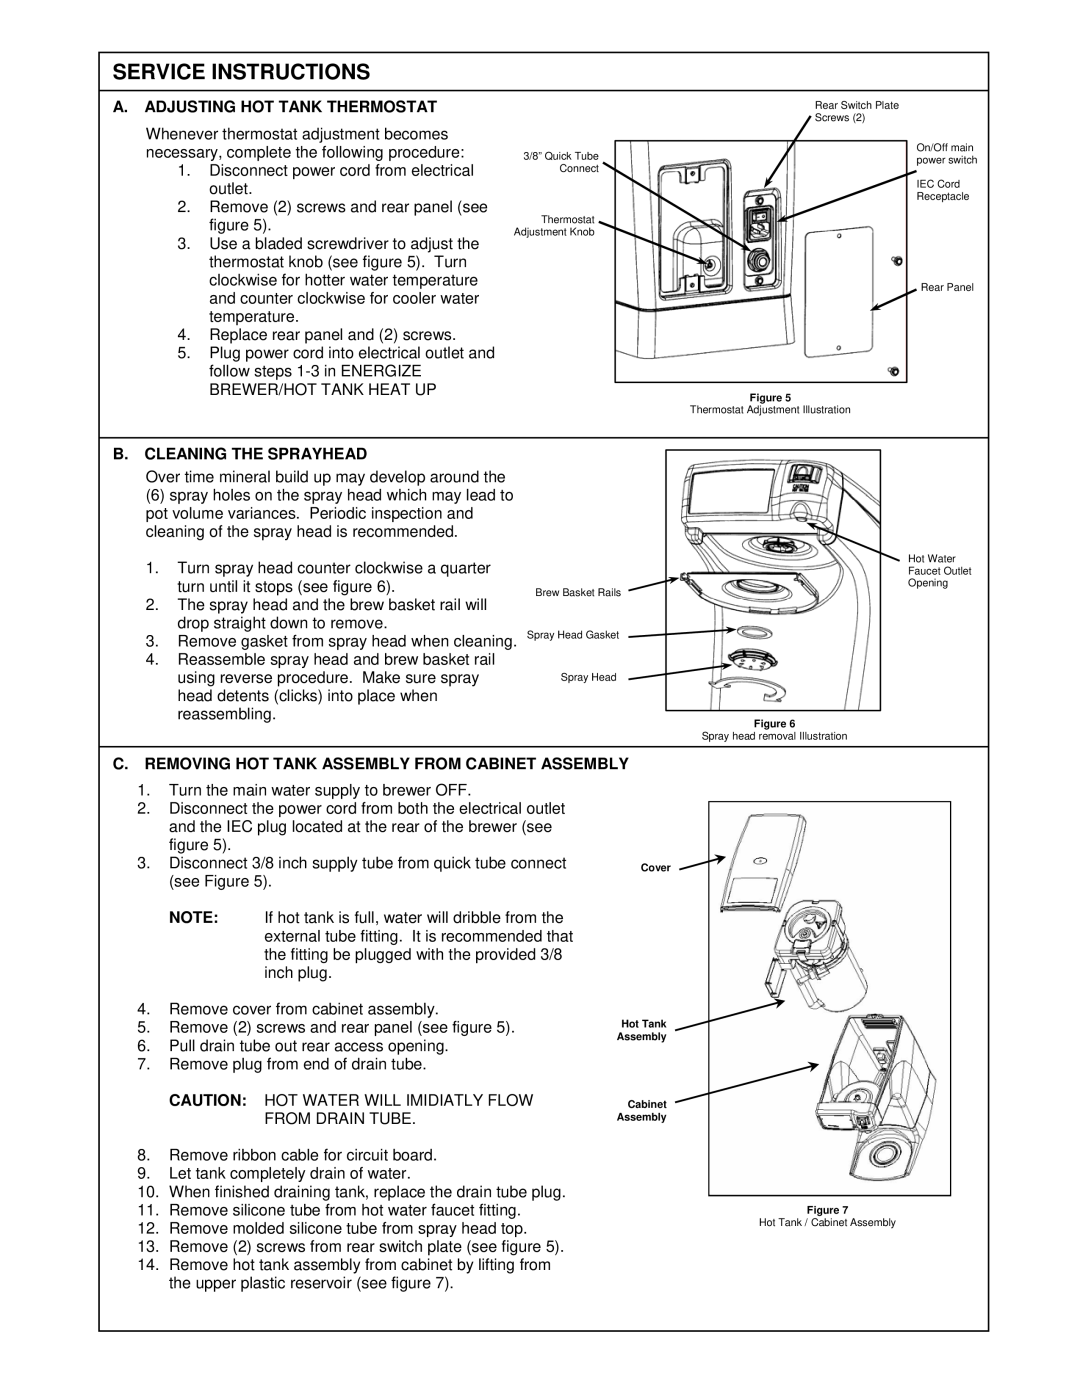 Oasis Concepts FSTB-A60, FSTB-A80 Service Instructions, A. Adjusting Hot Tank Thermostat, B. Cleaning The Sprayhead 